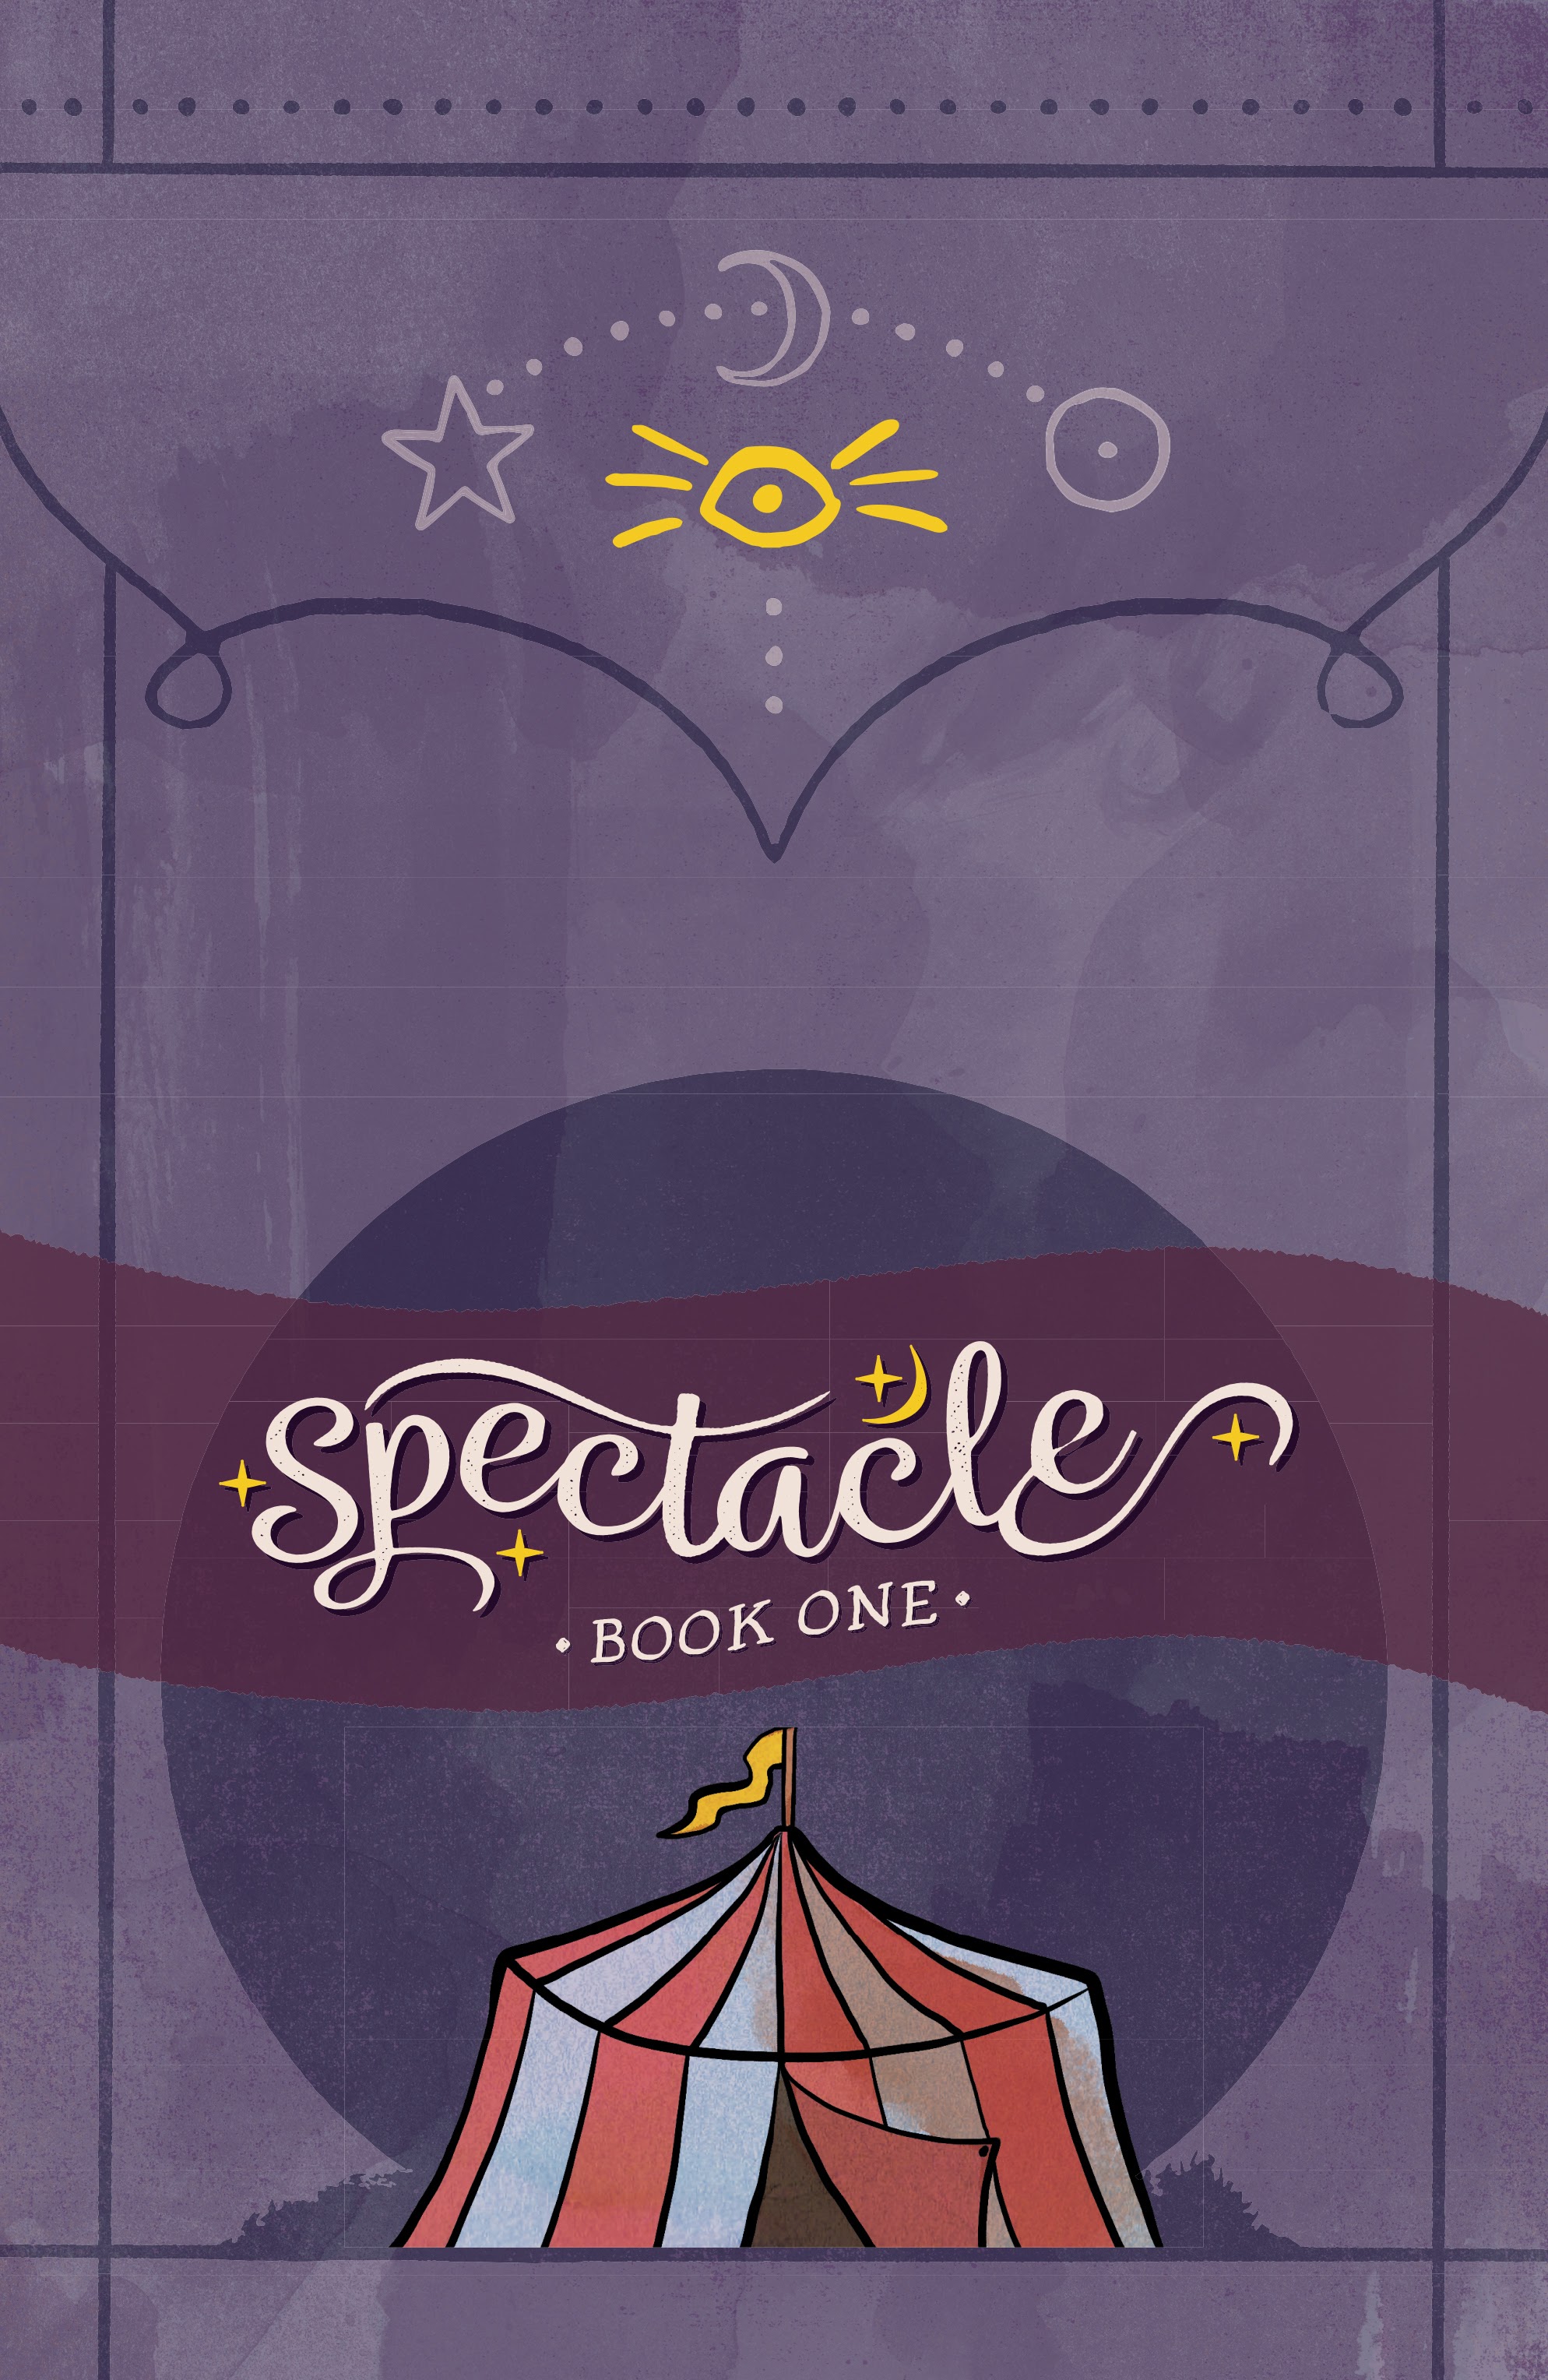 Read online Spectacle comic -  Issue # TPB 1 - 2